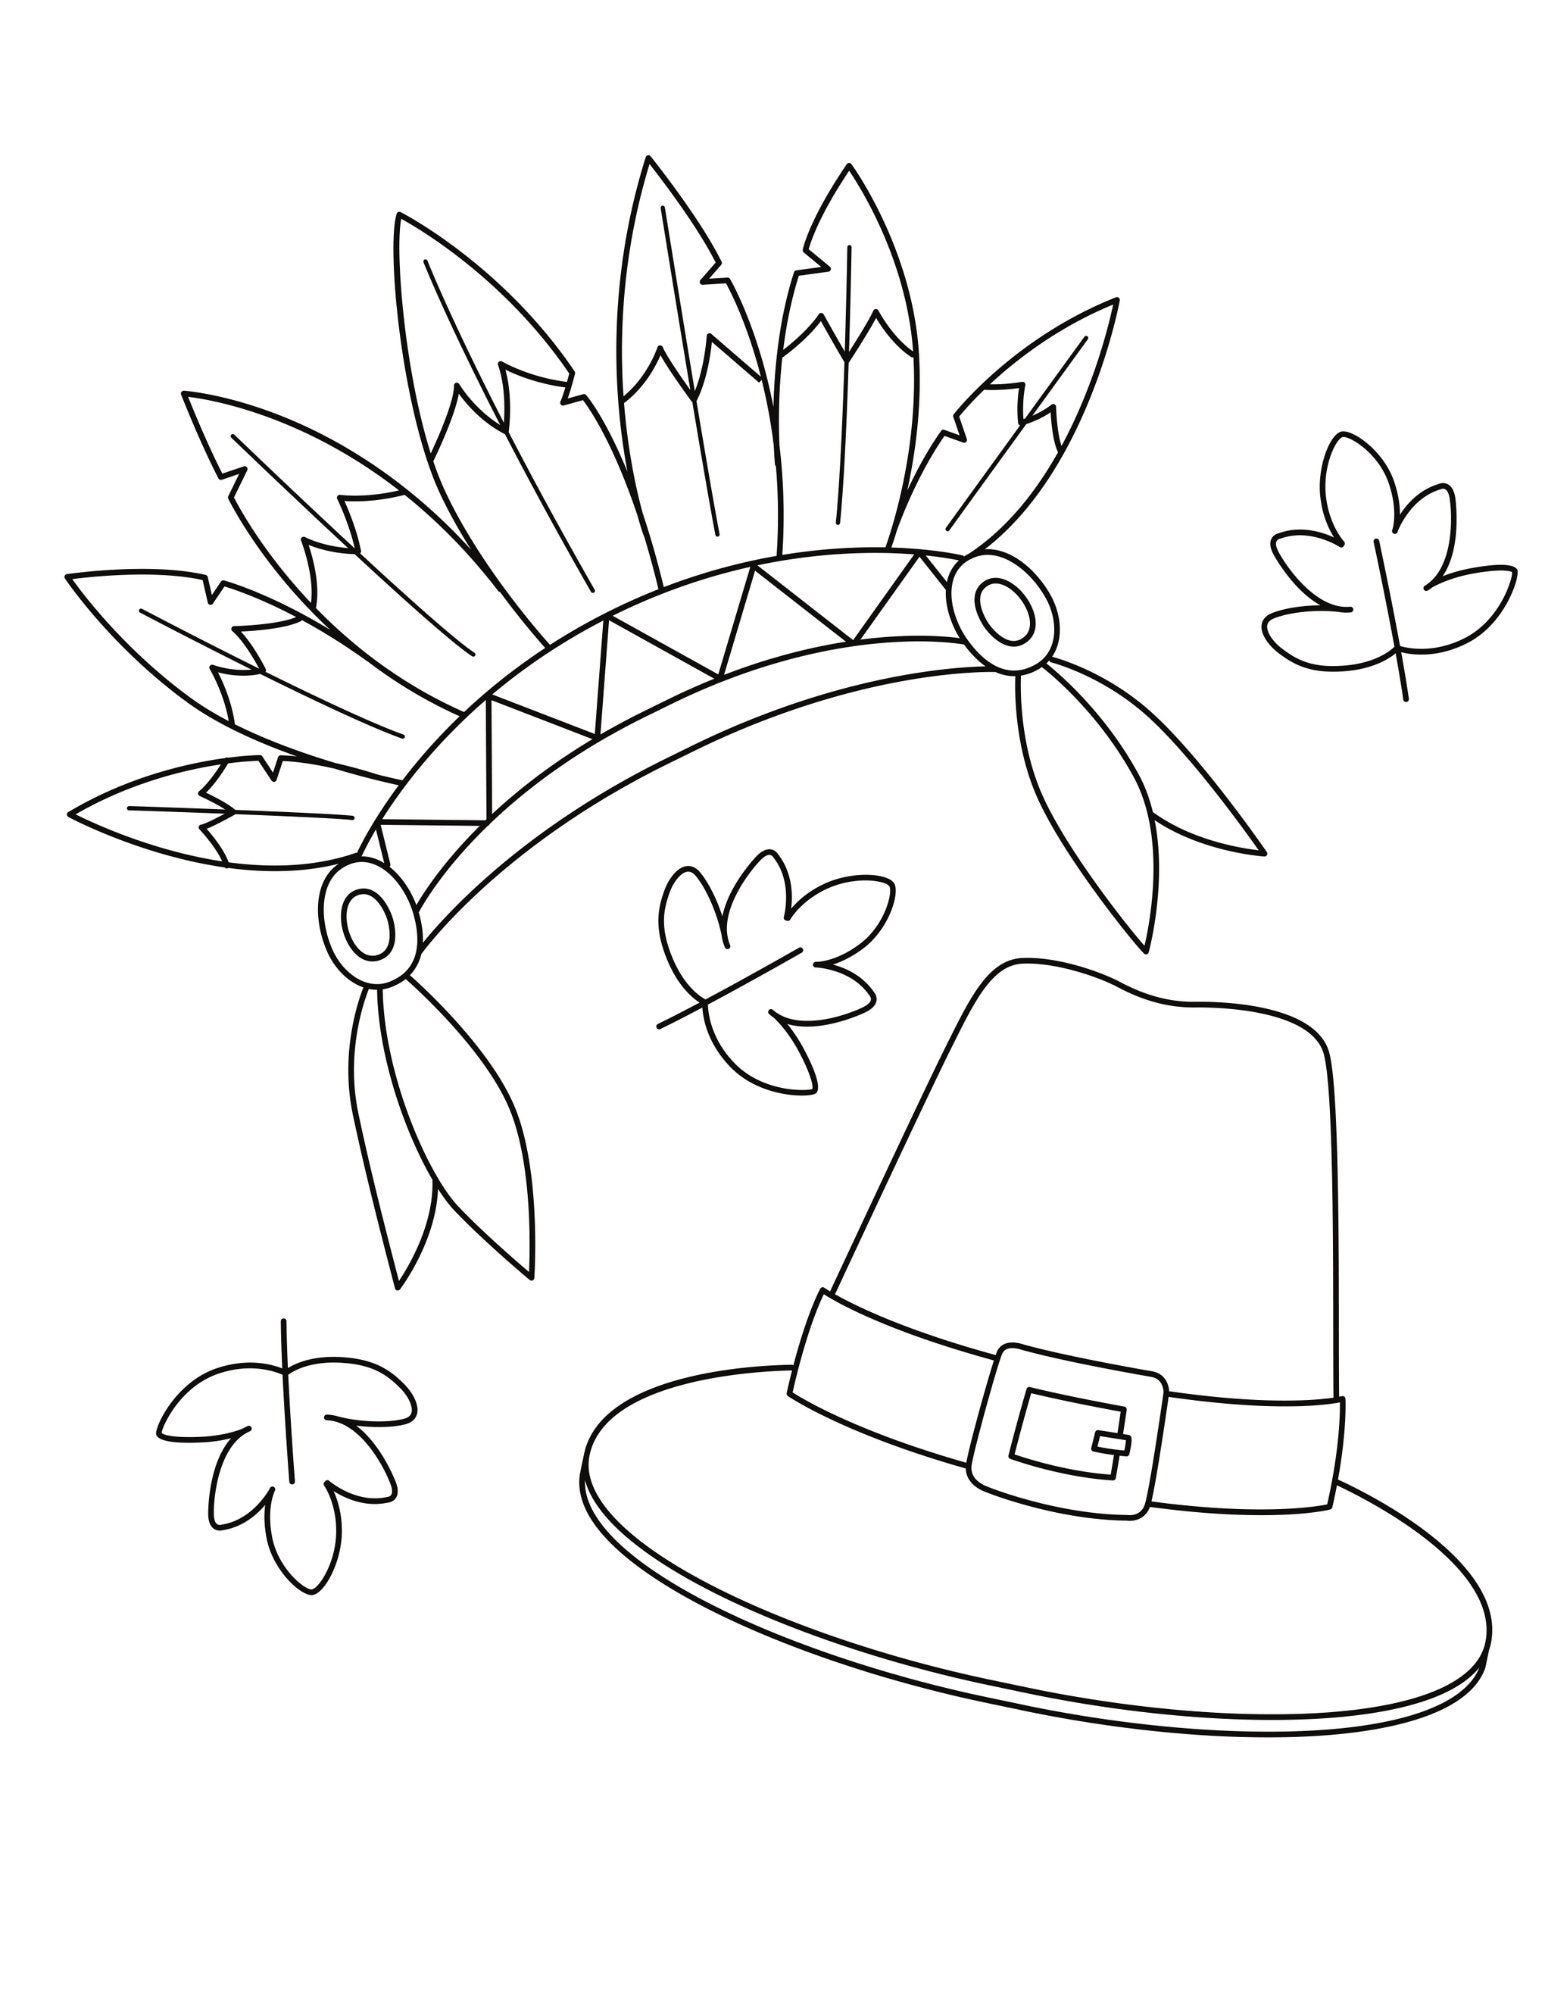 Pilgrim hat and native american feather headdress digital download printable coloring page